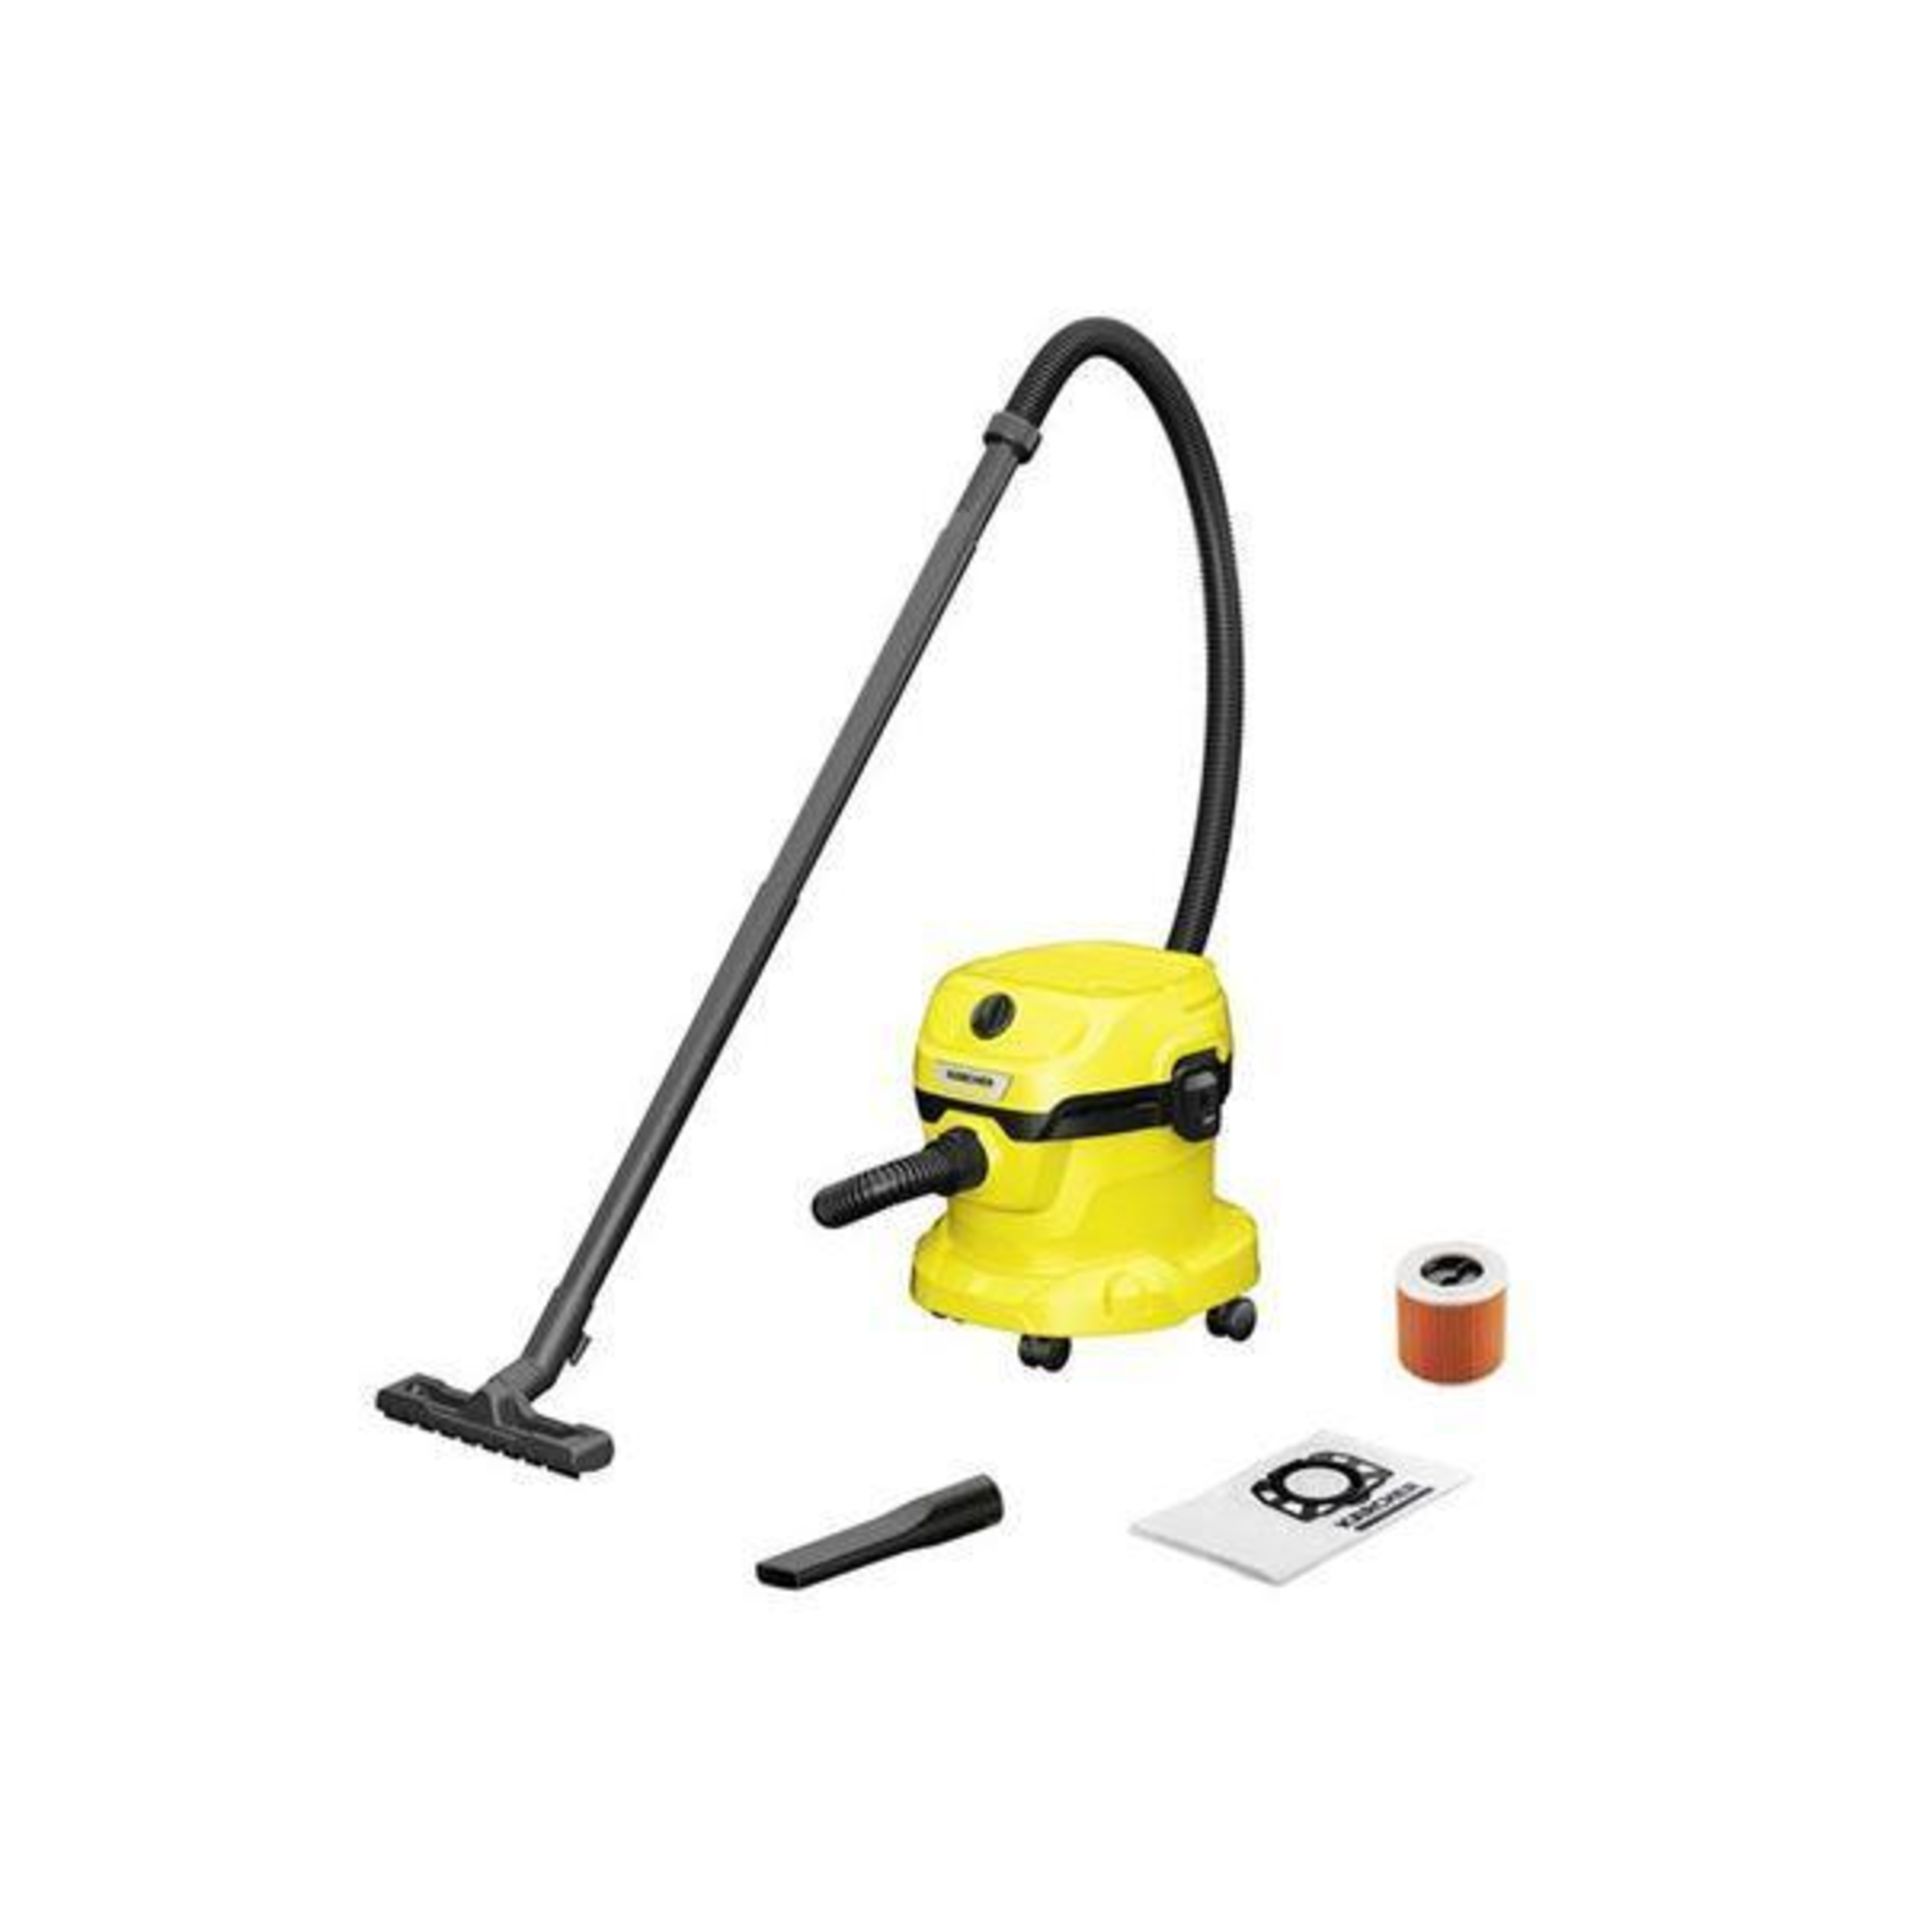 Karcher WD 2 Plus Wet and Dry Vacuum Cleaner 12L - SR46. The powerful Karcher WD 2 Plus wet and